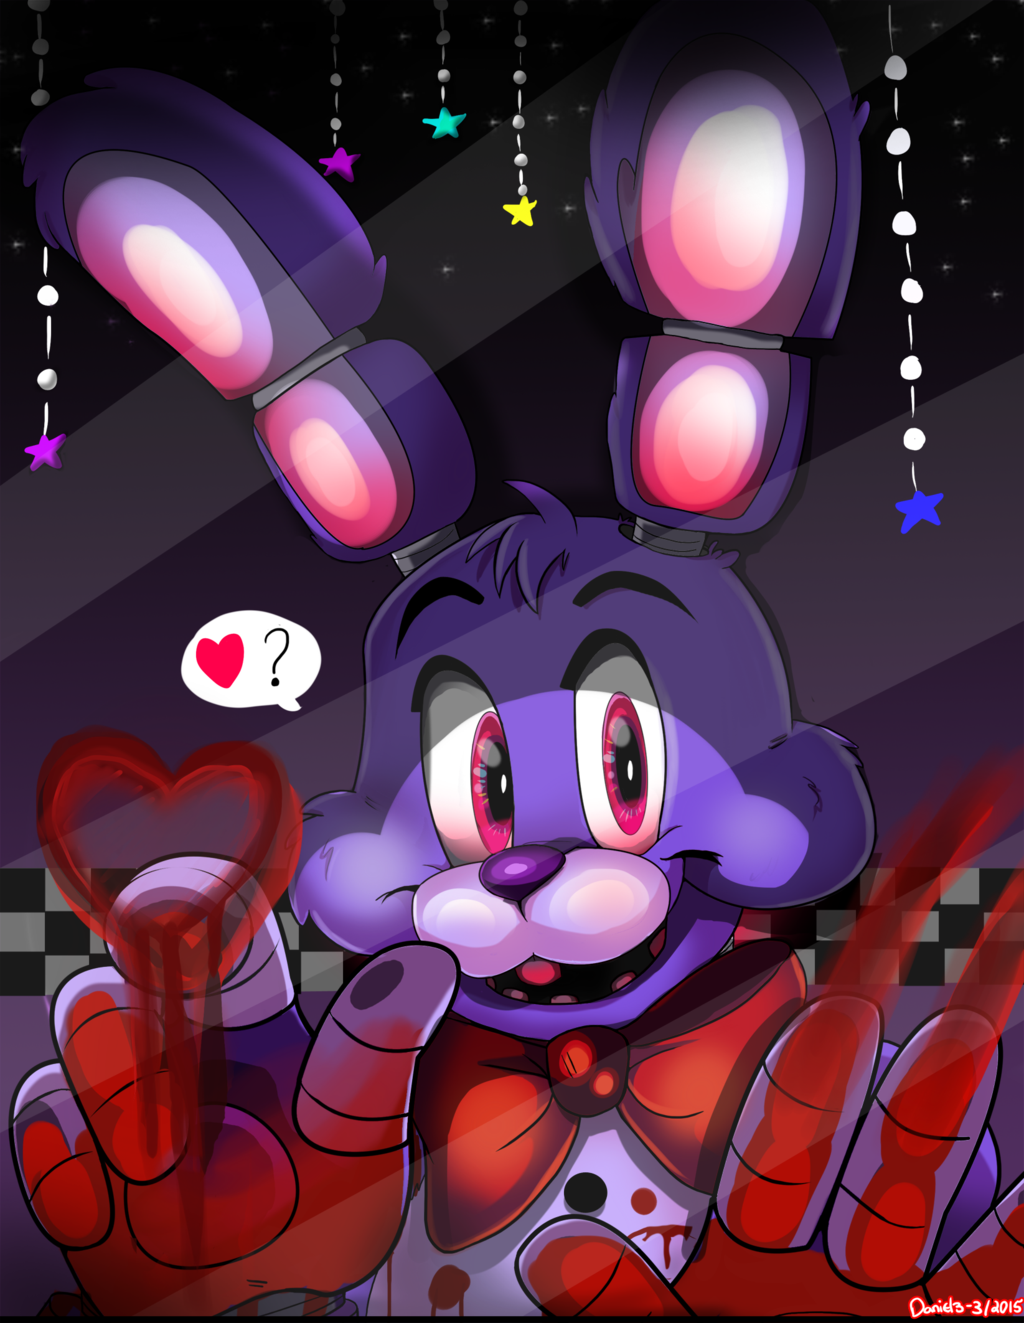 Cute Pictures Of Fnaf Characters